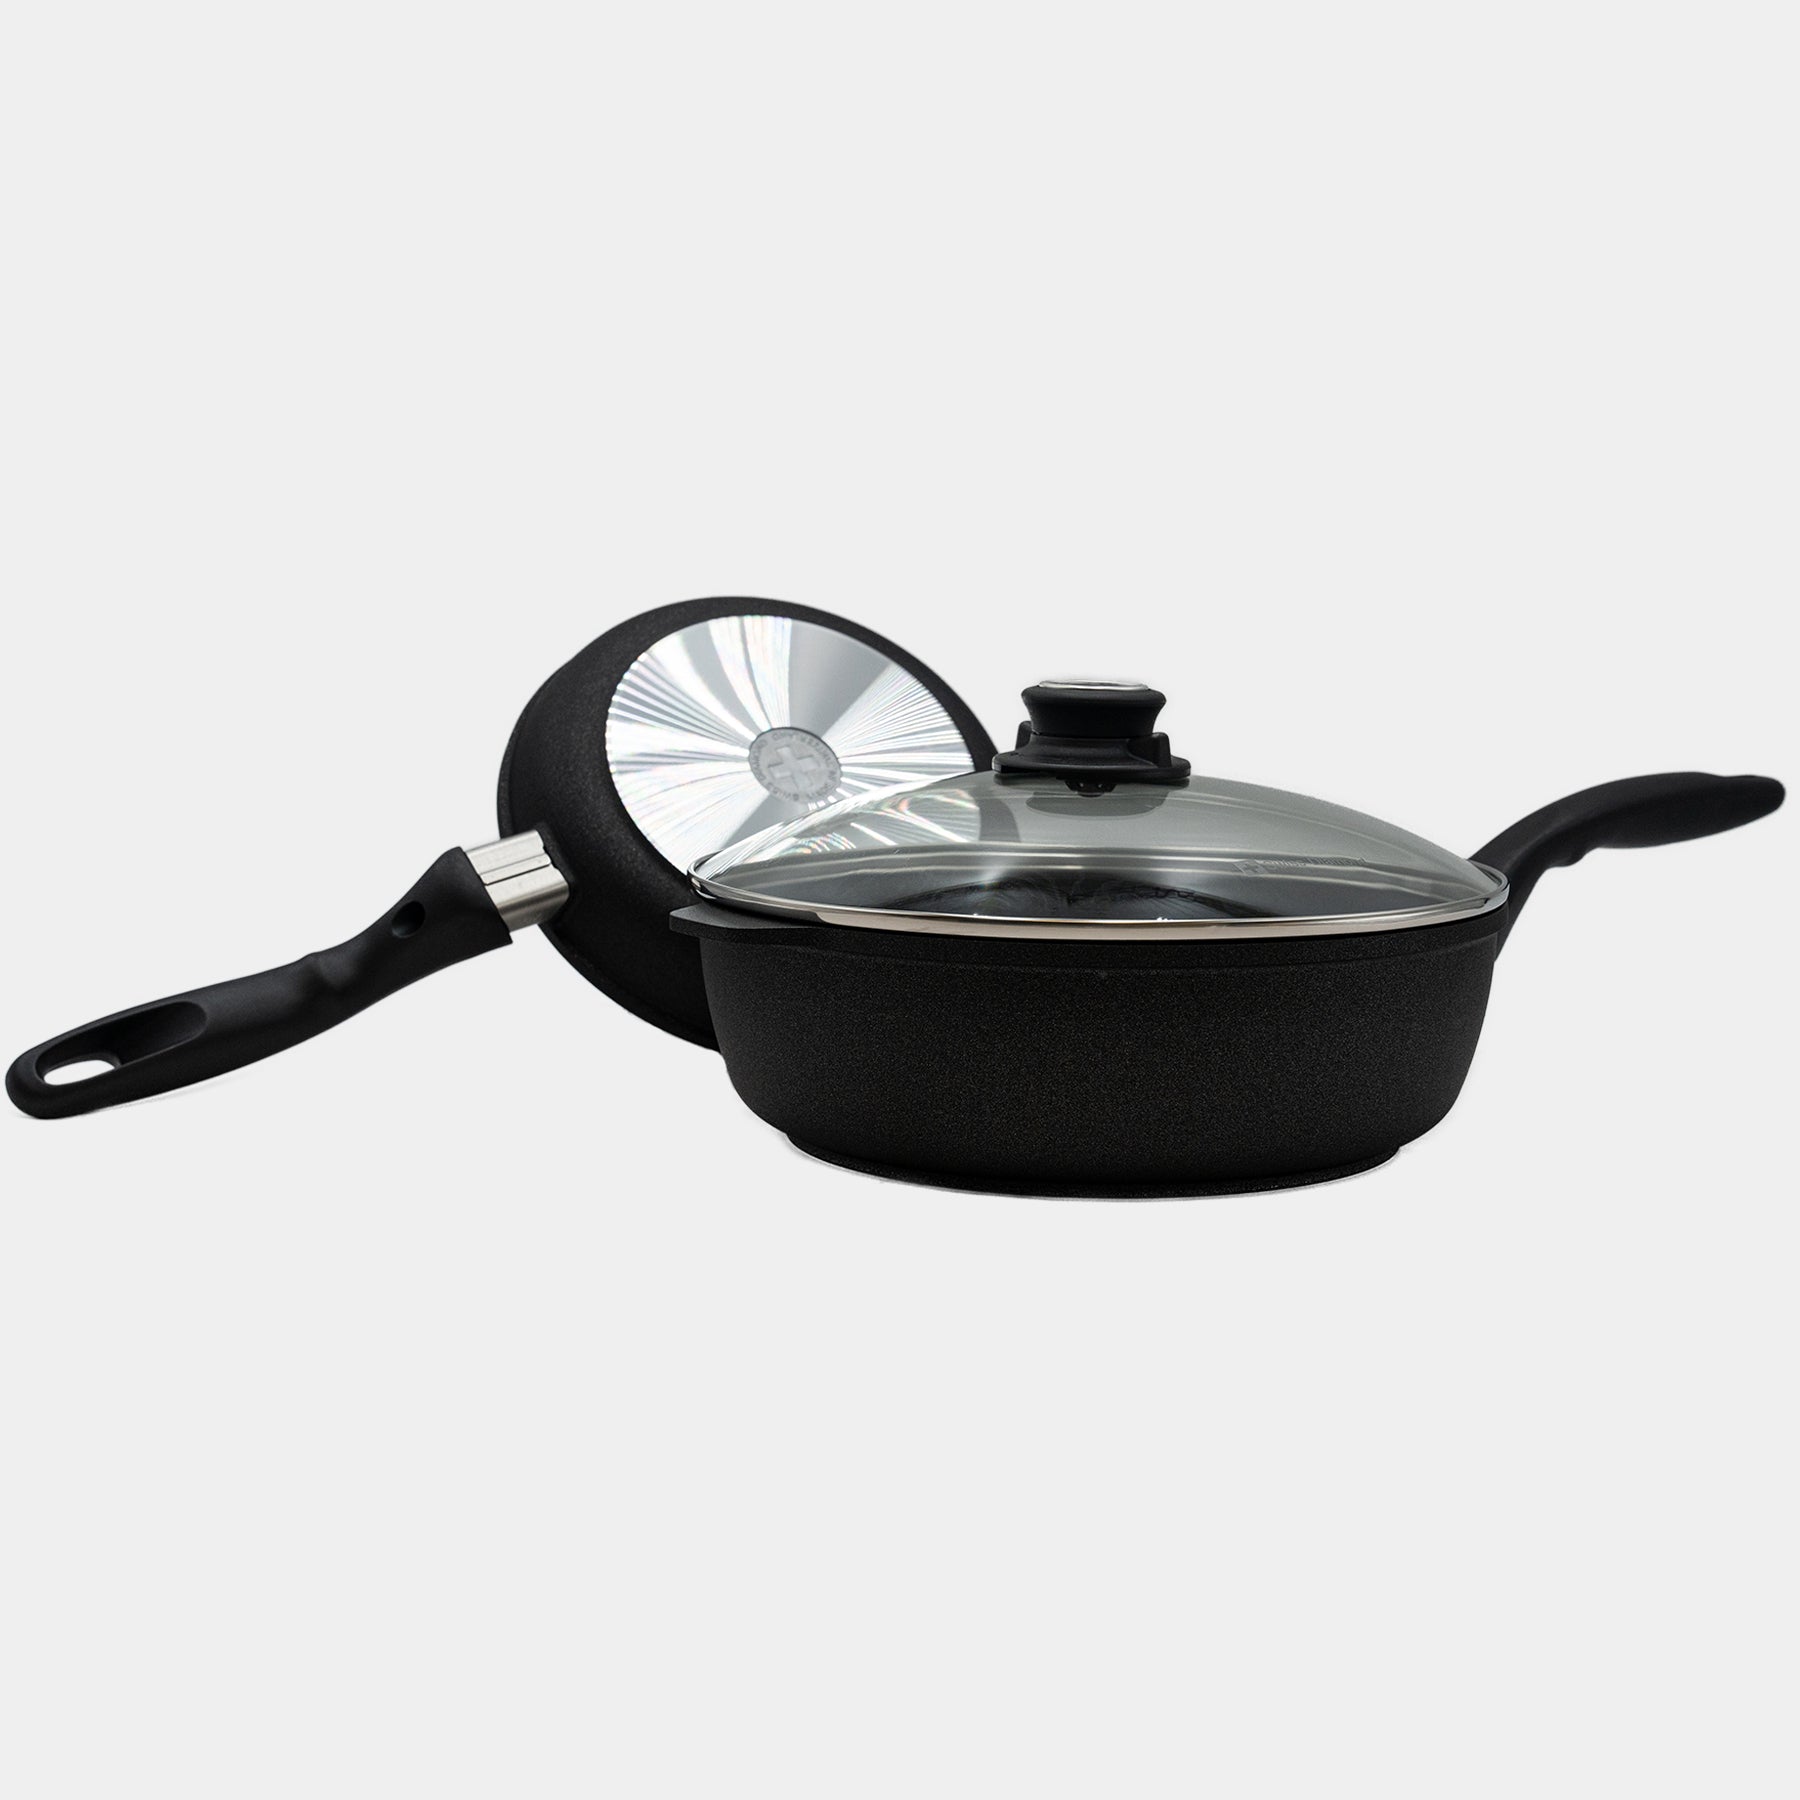 XD Nonstick 8" Fry Pan and 3.8 qt Saute Pan with Glass Lid Set